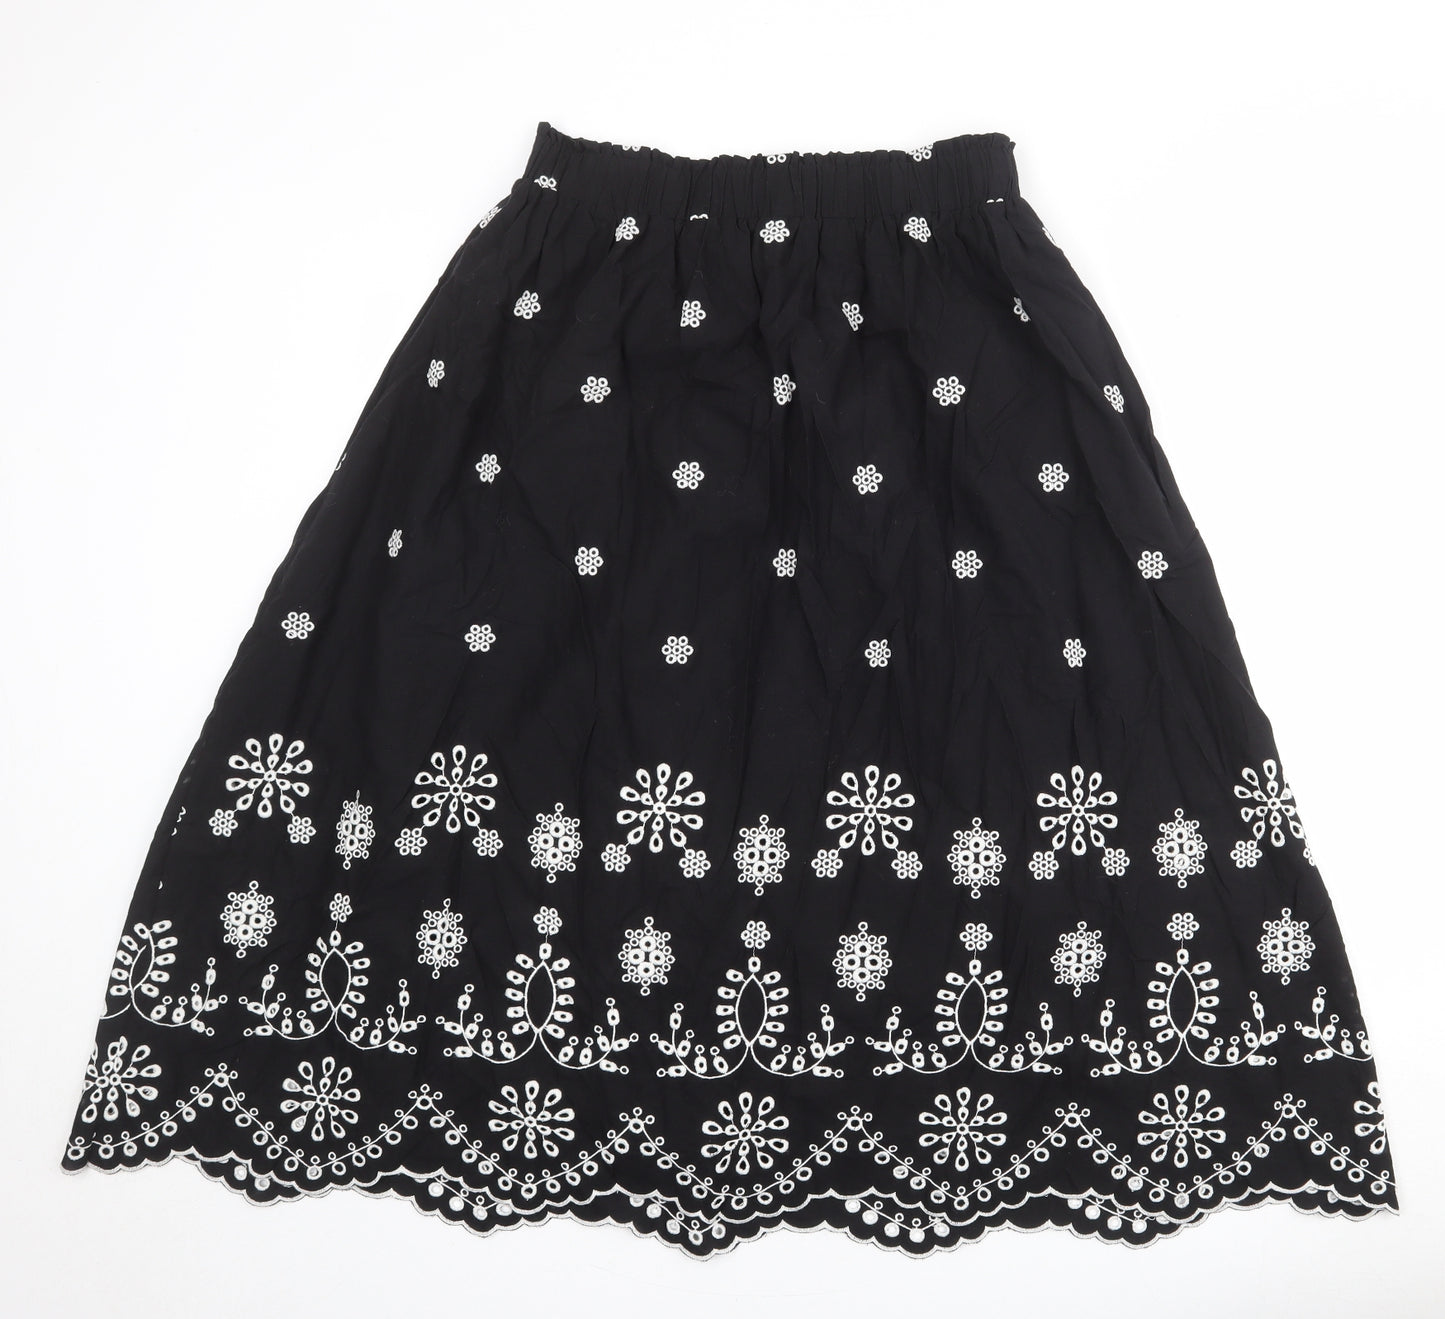 Marks and Spencer Womens Black Geometric Cotton Swing Skirt Size 12